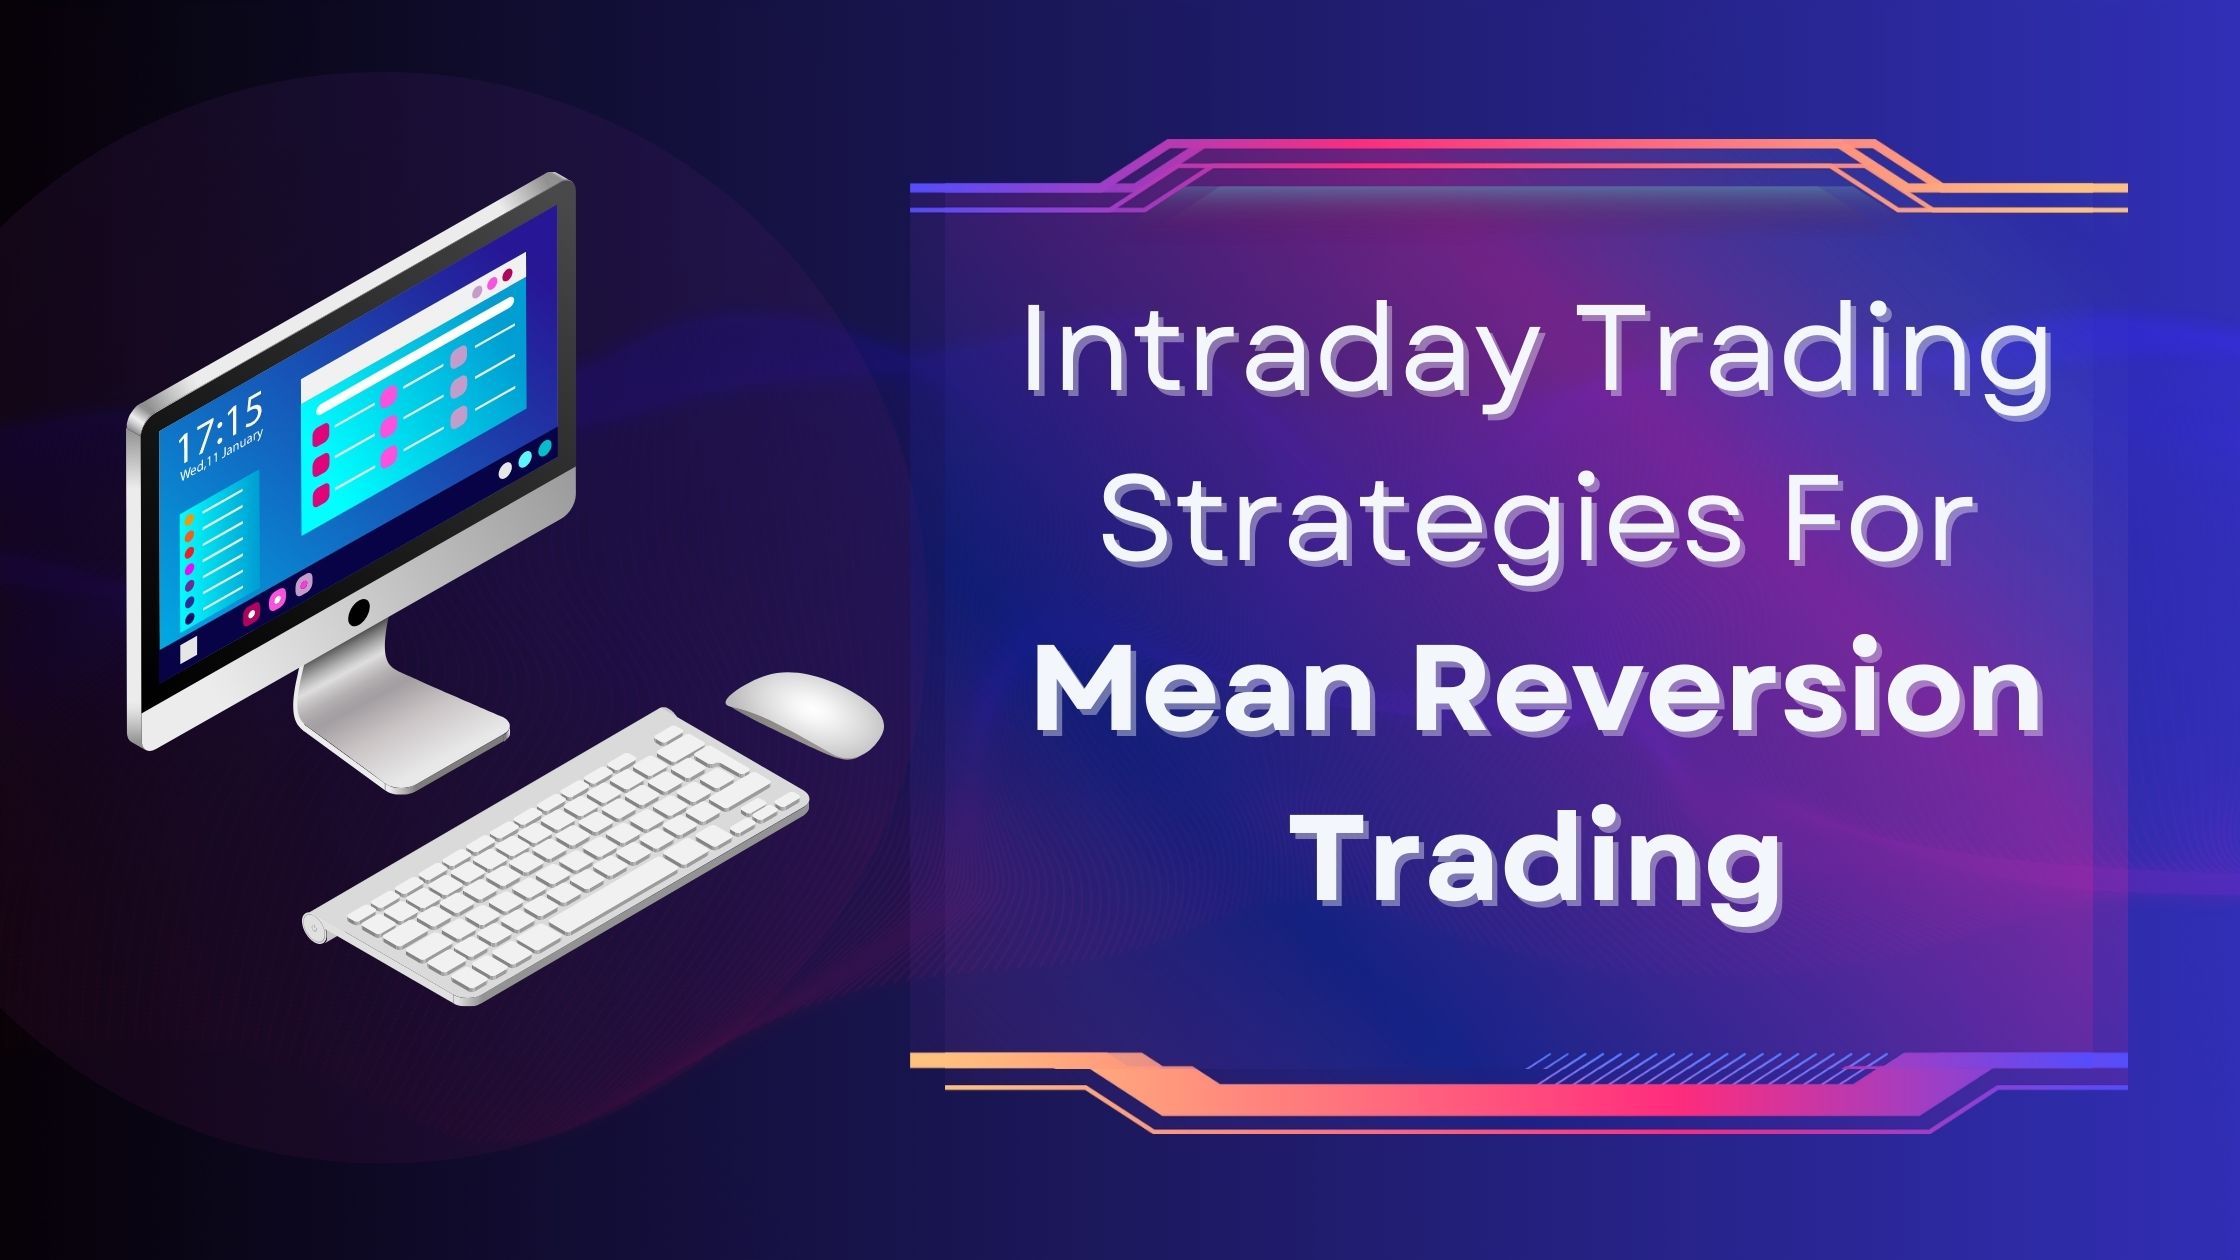 Intraday Trading Strategies: Mean Reversion Trading